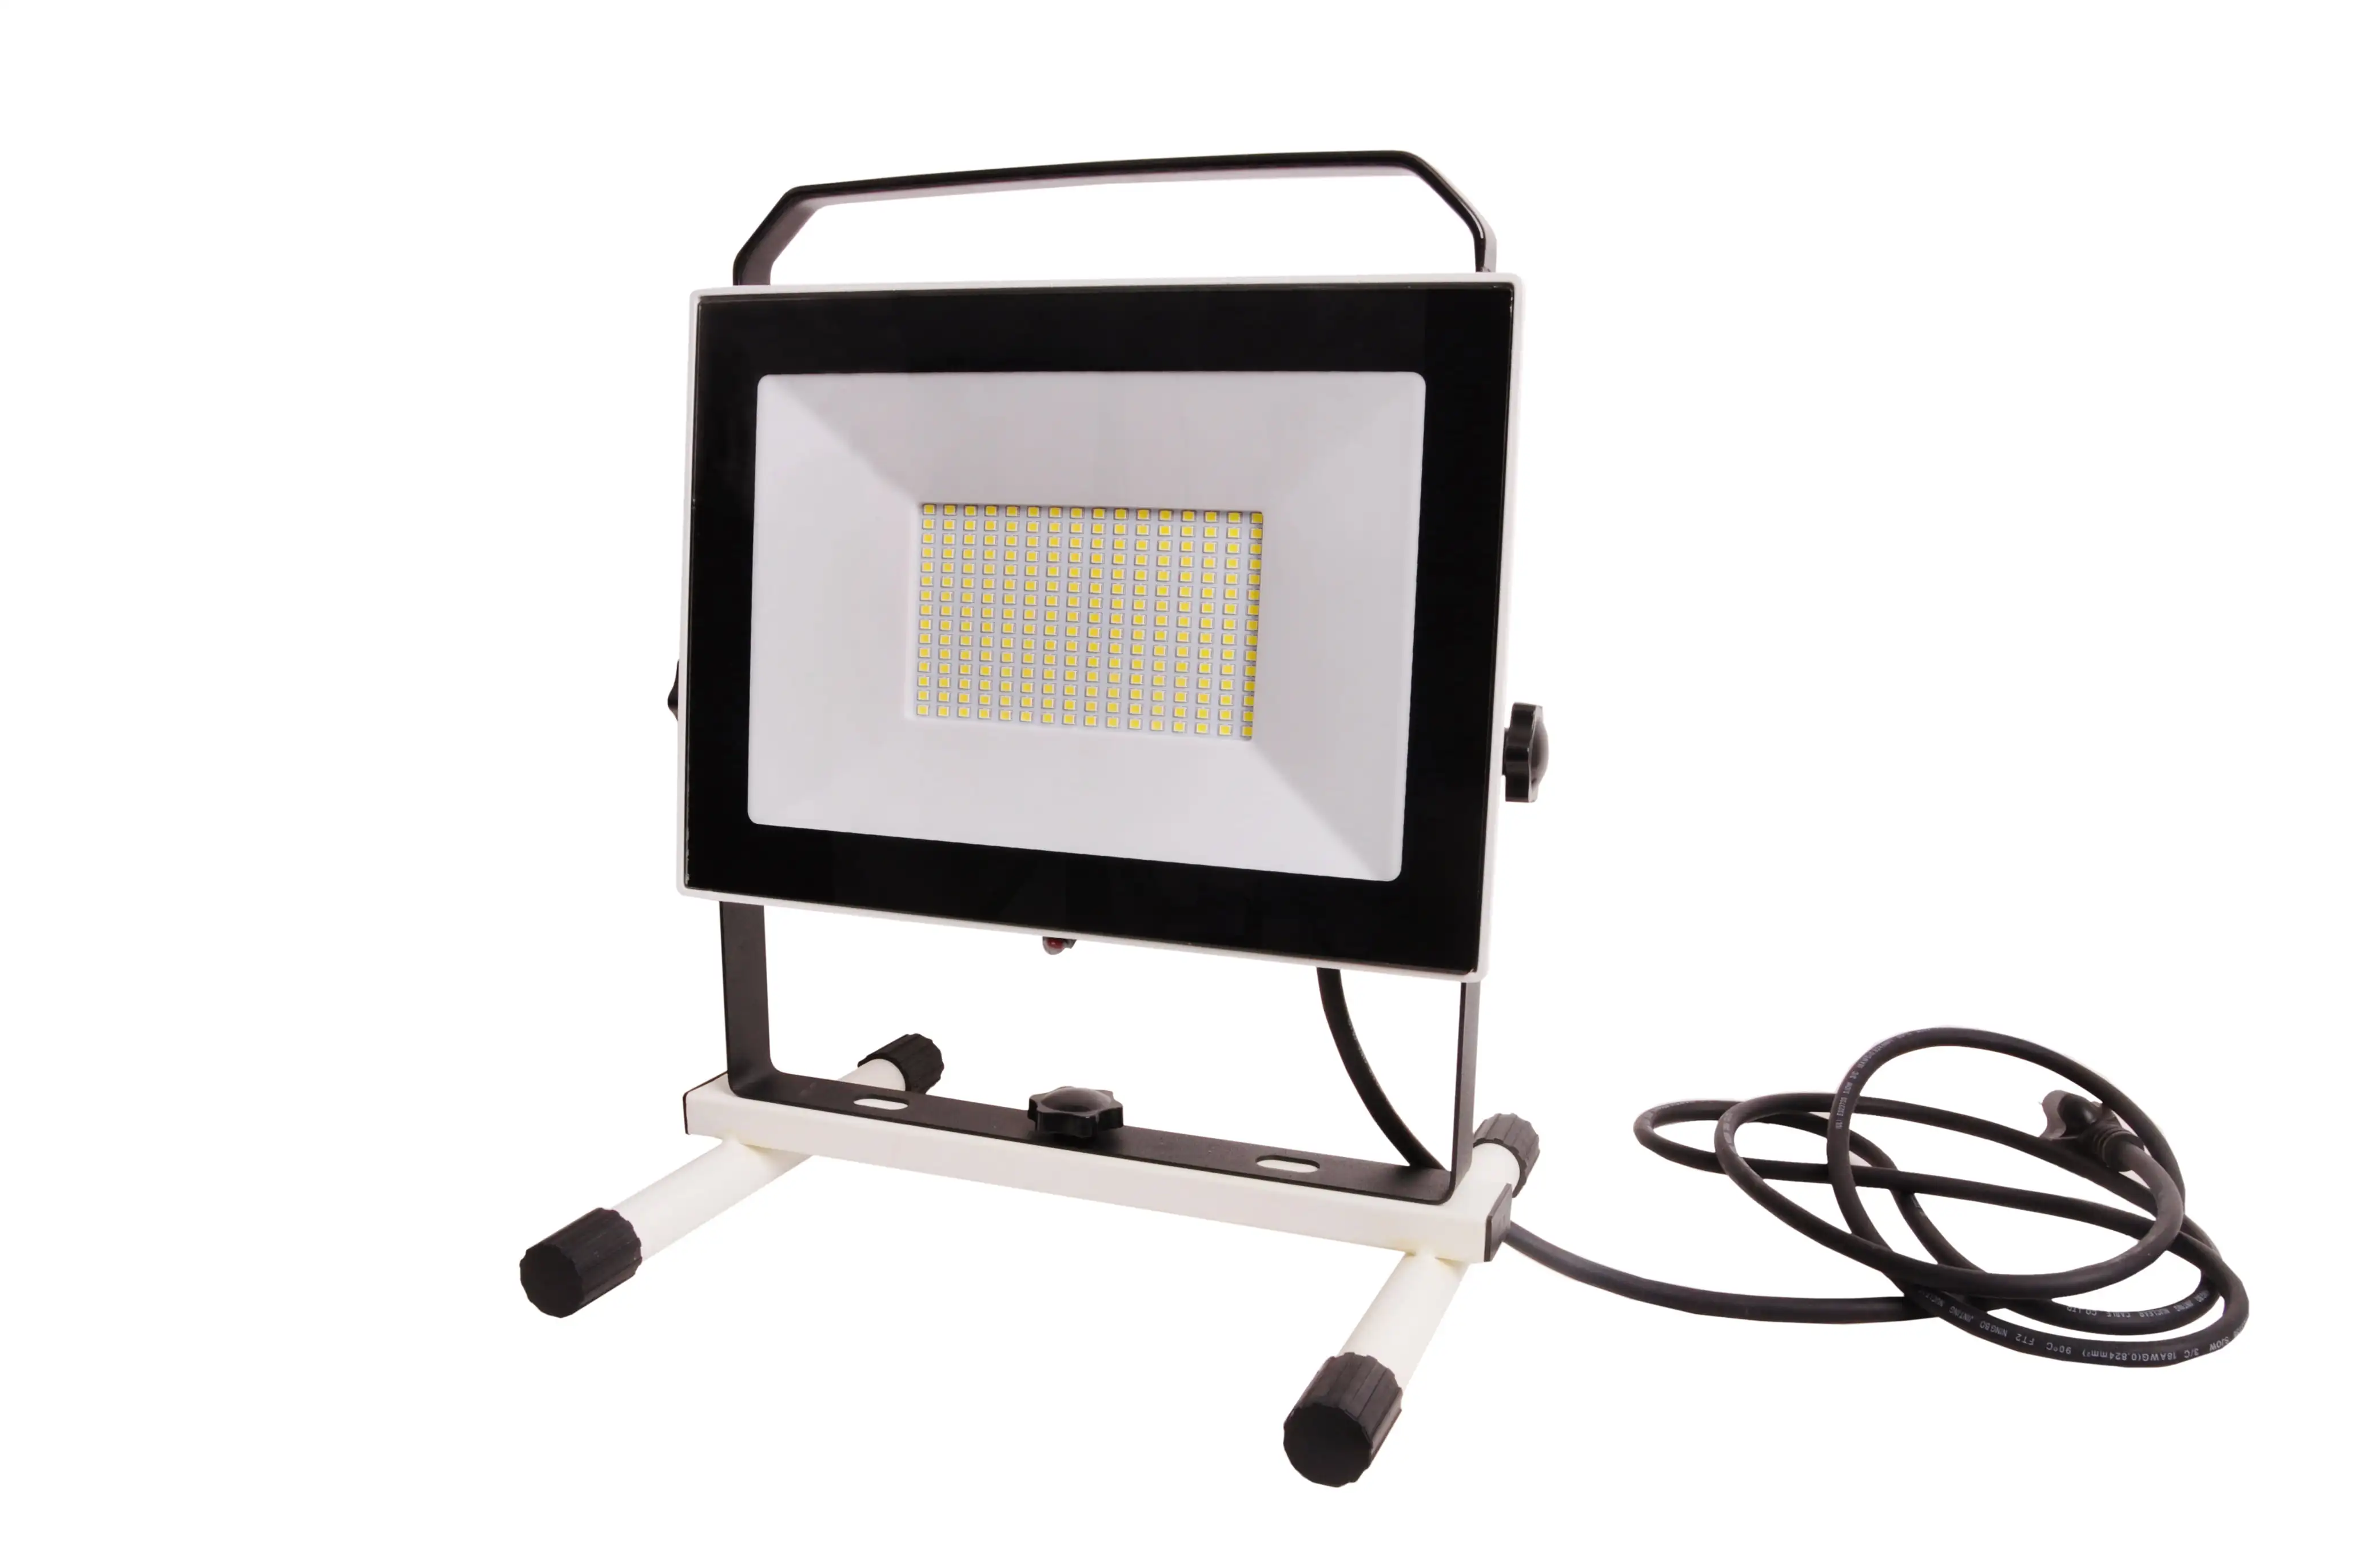 

10000LM 110 W LED Work Light (1000W Equivalent). IP 65 Water Proof Flood Light, Stand Working Light for Workshop, Construction S